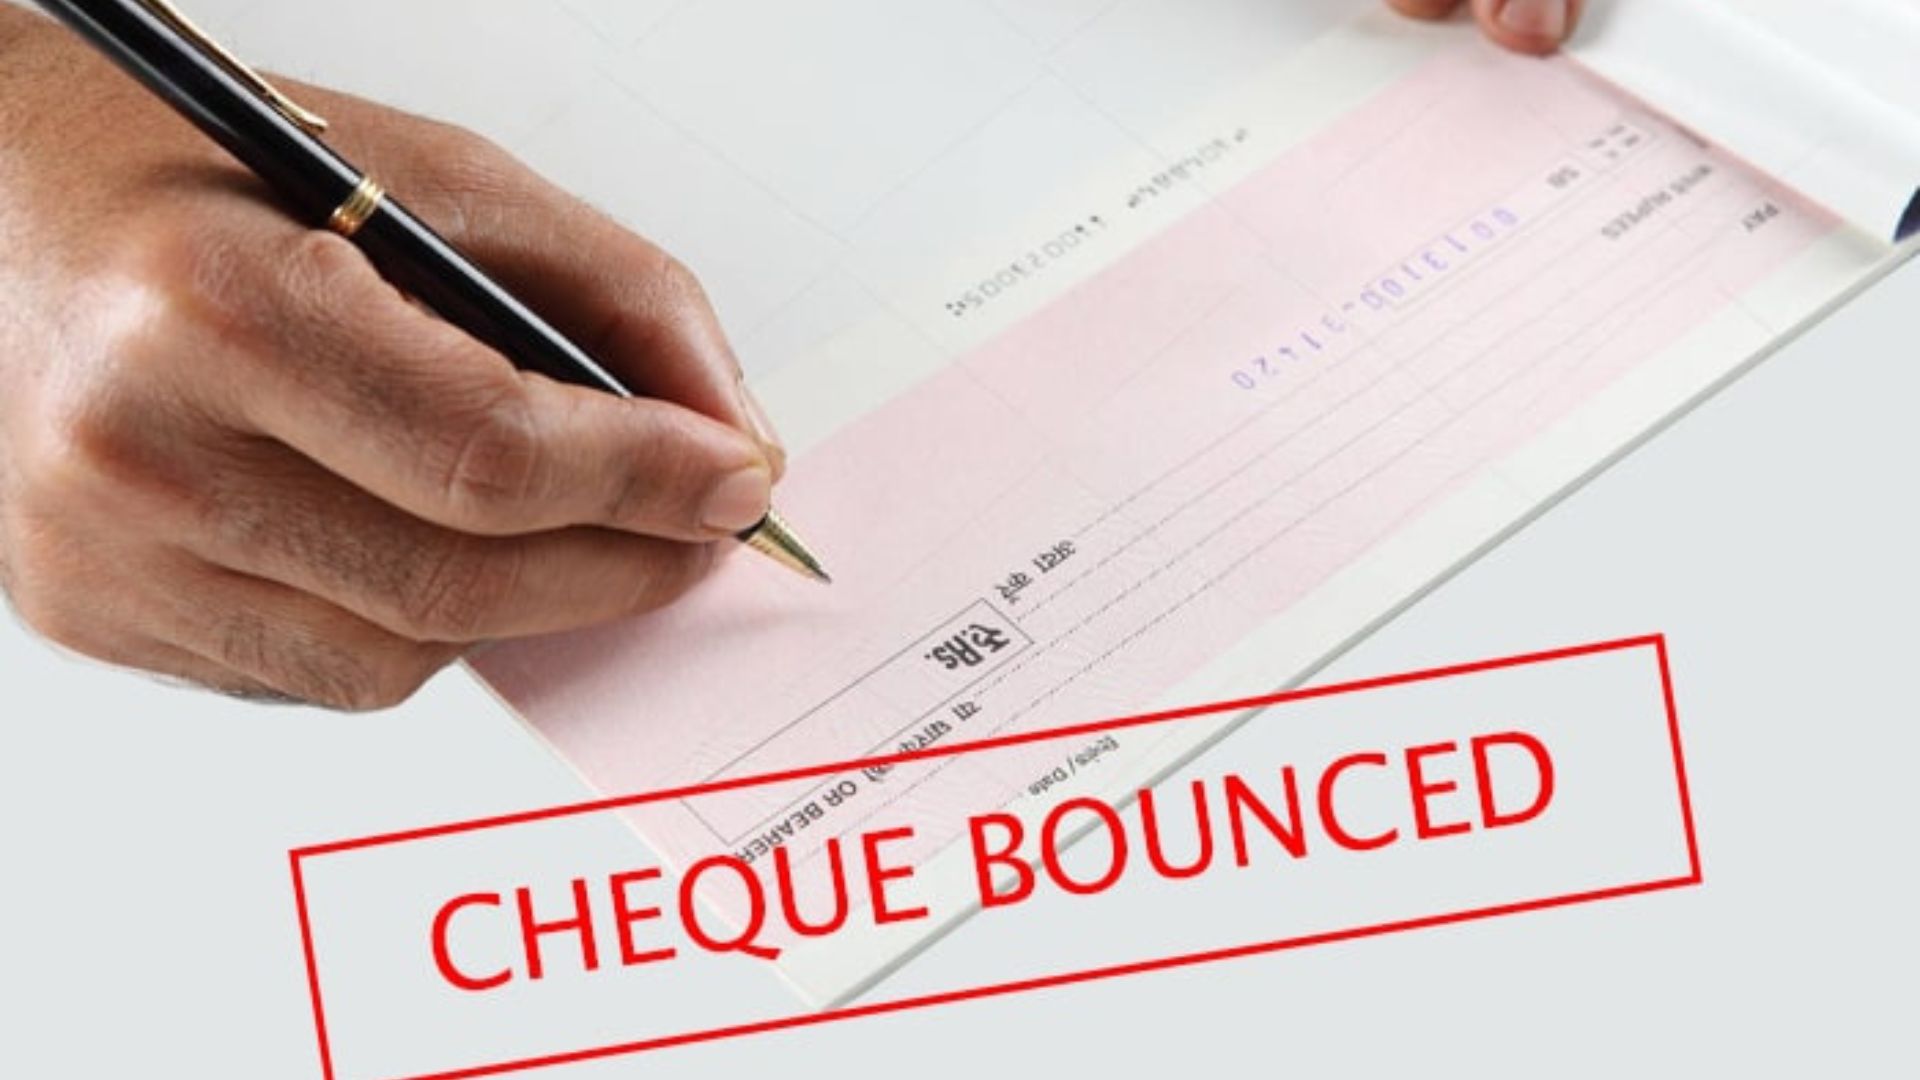 Cheque Bounce - Meaning, Reasons and Charges